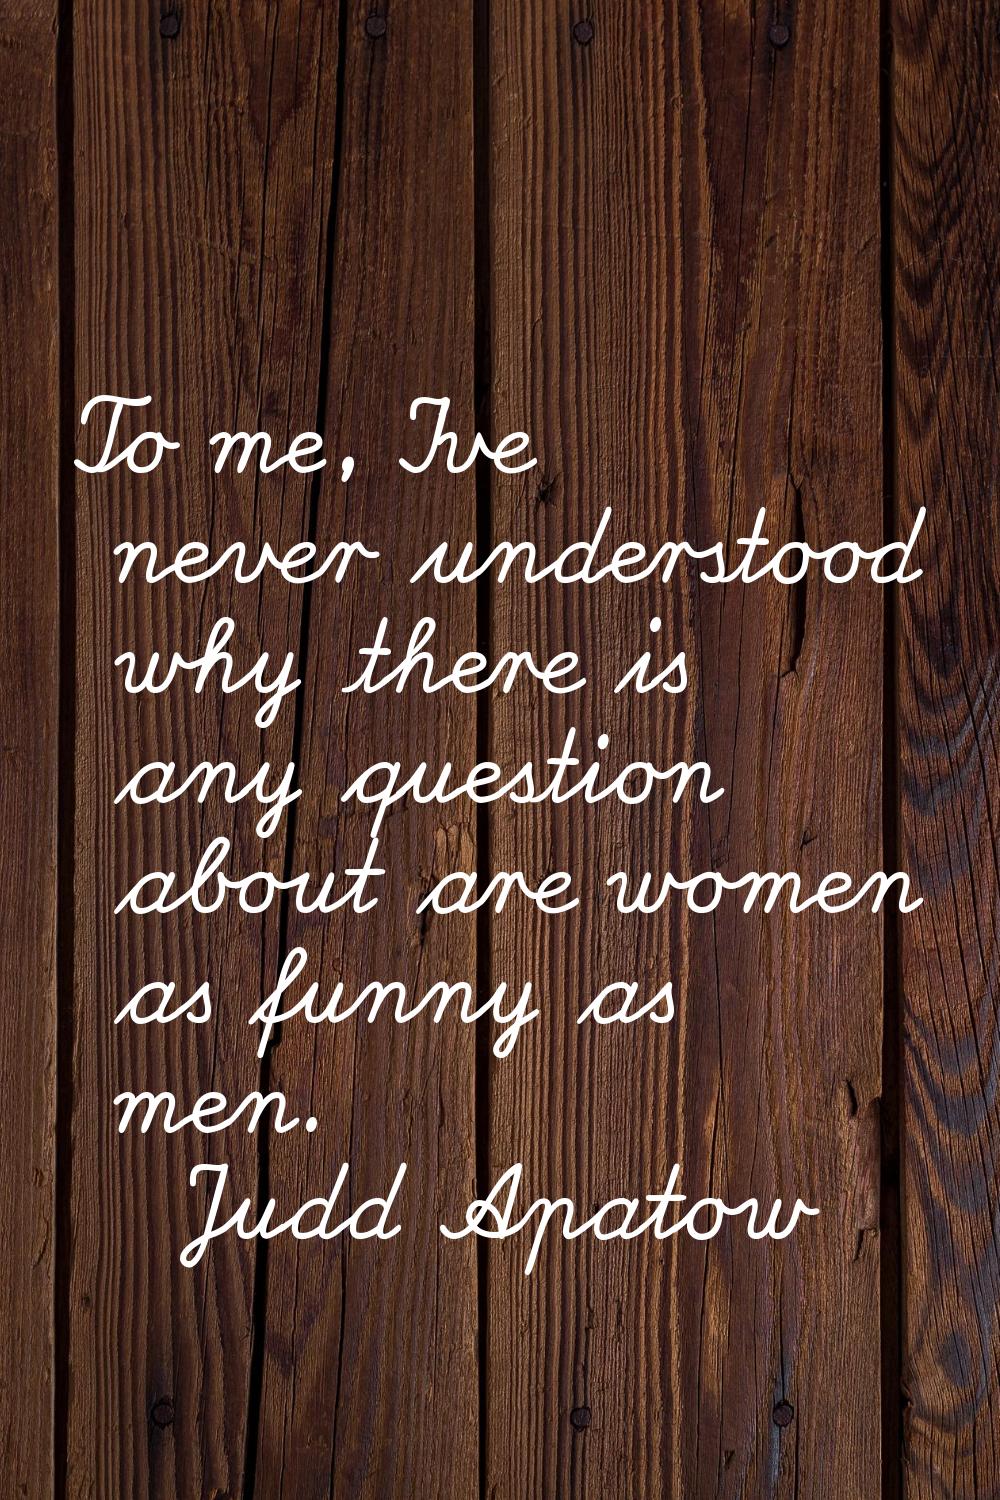 To me, I've never understood why there is any question about are women as funny as men.